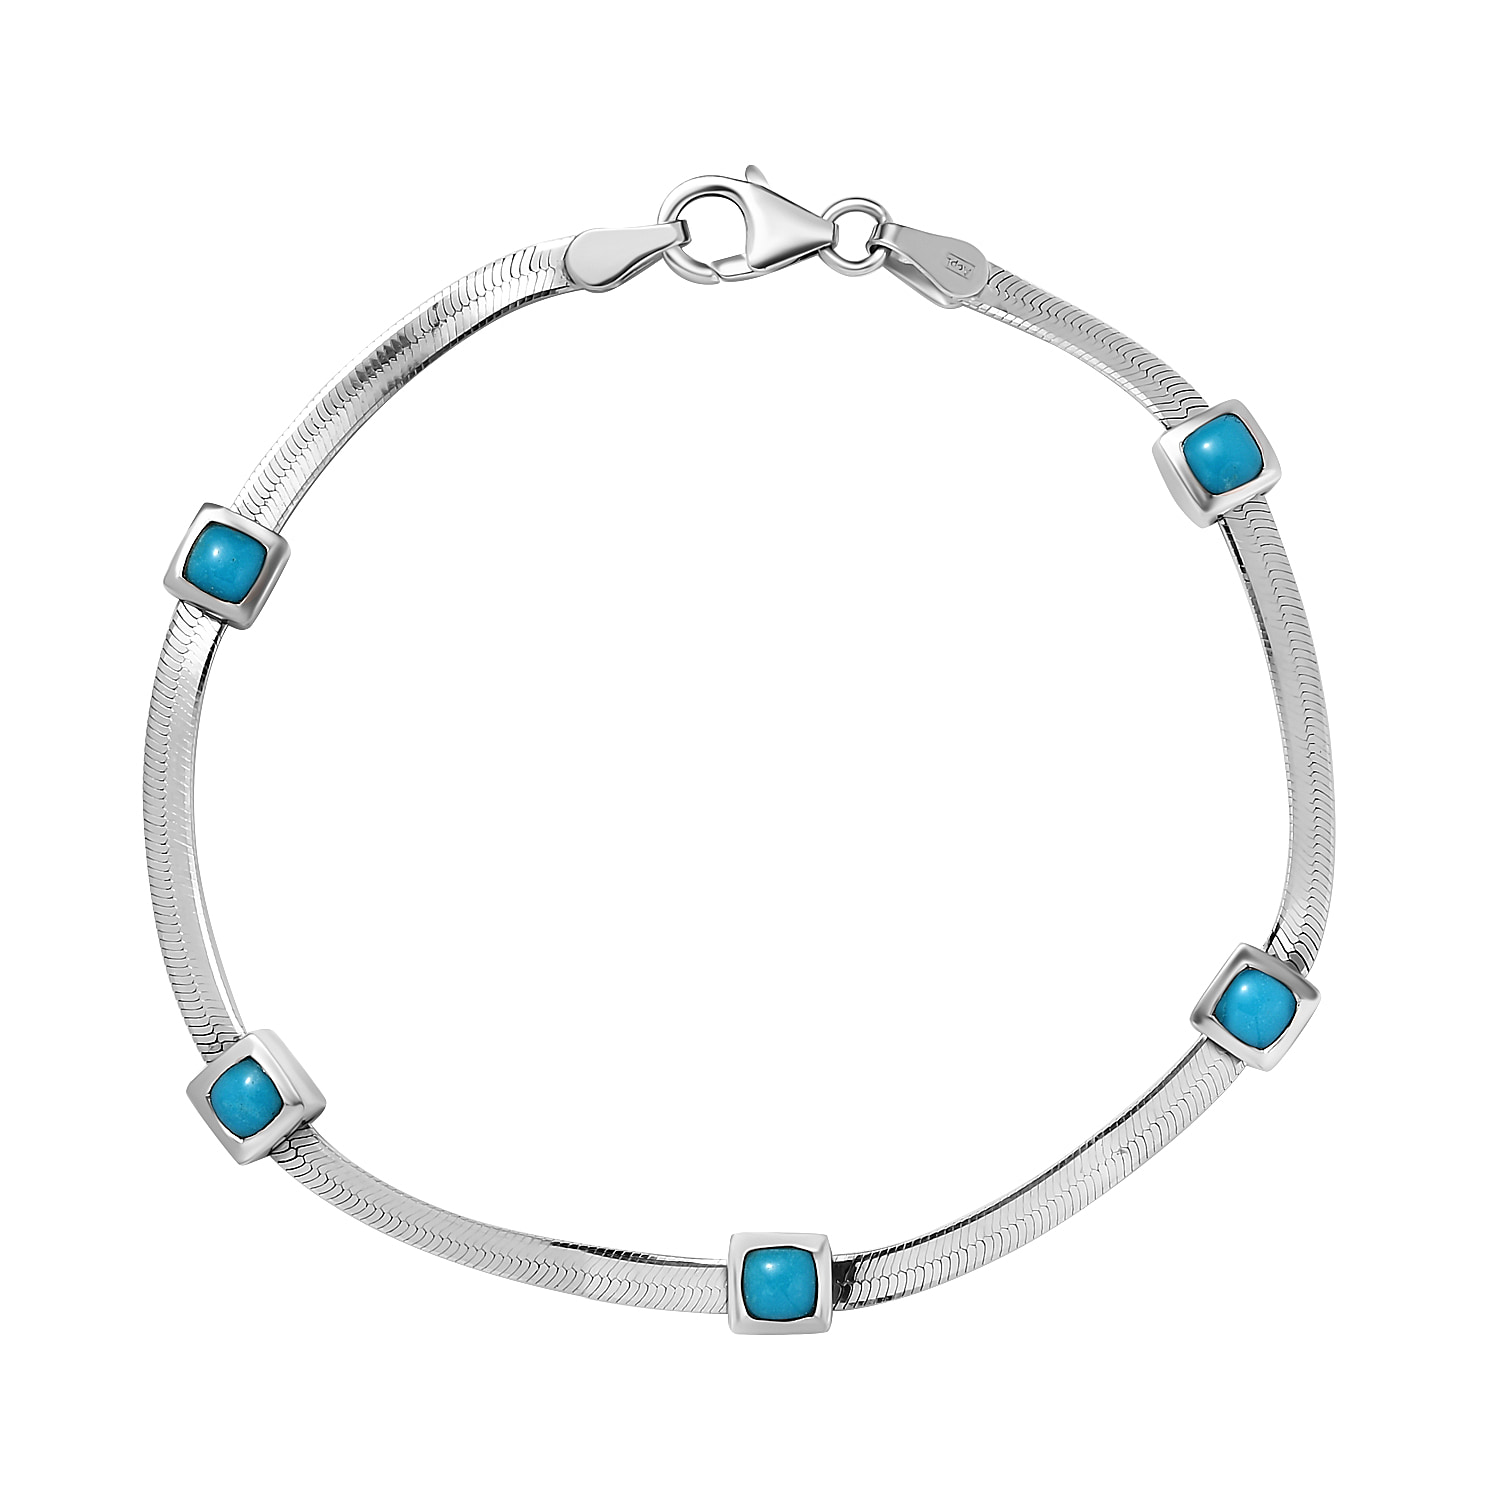 Arizona Sleeping Beauty Turquoise Bracelet (Size - 7.5) in Platinum Overlay Sterling Silver 1.80 Ct